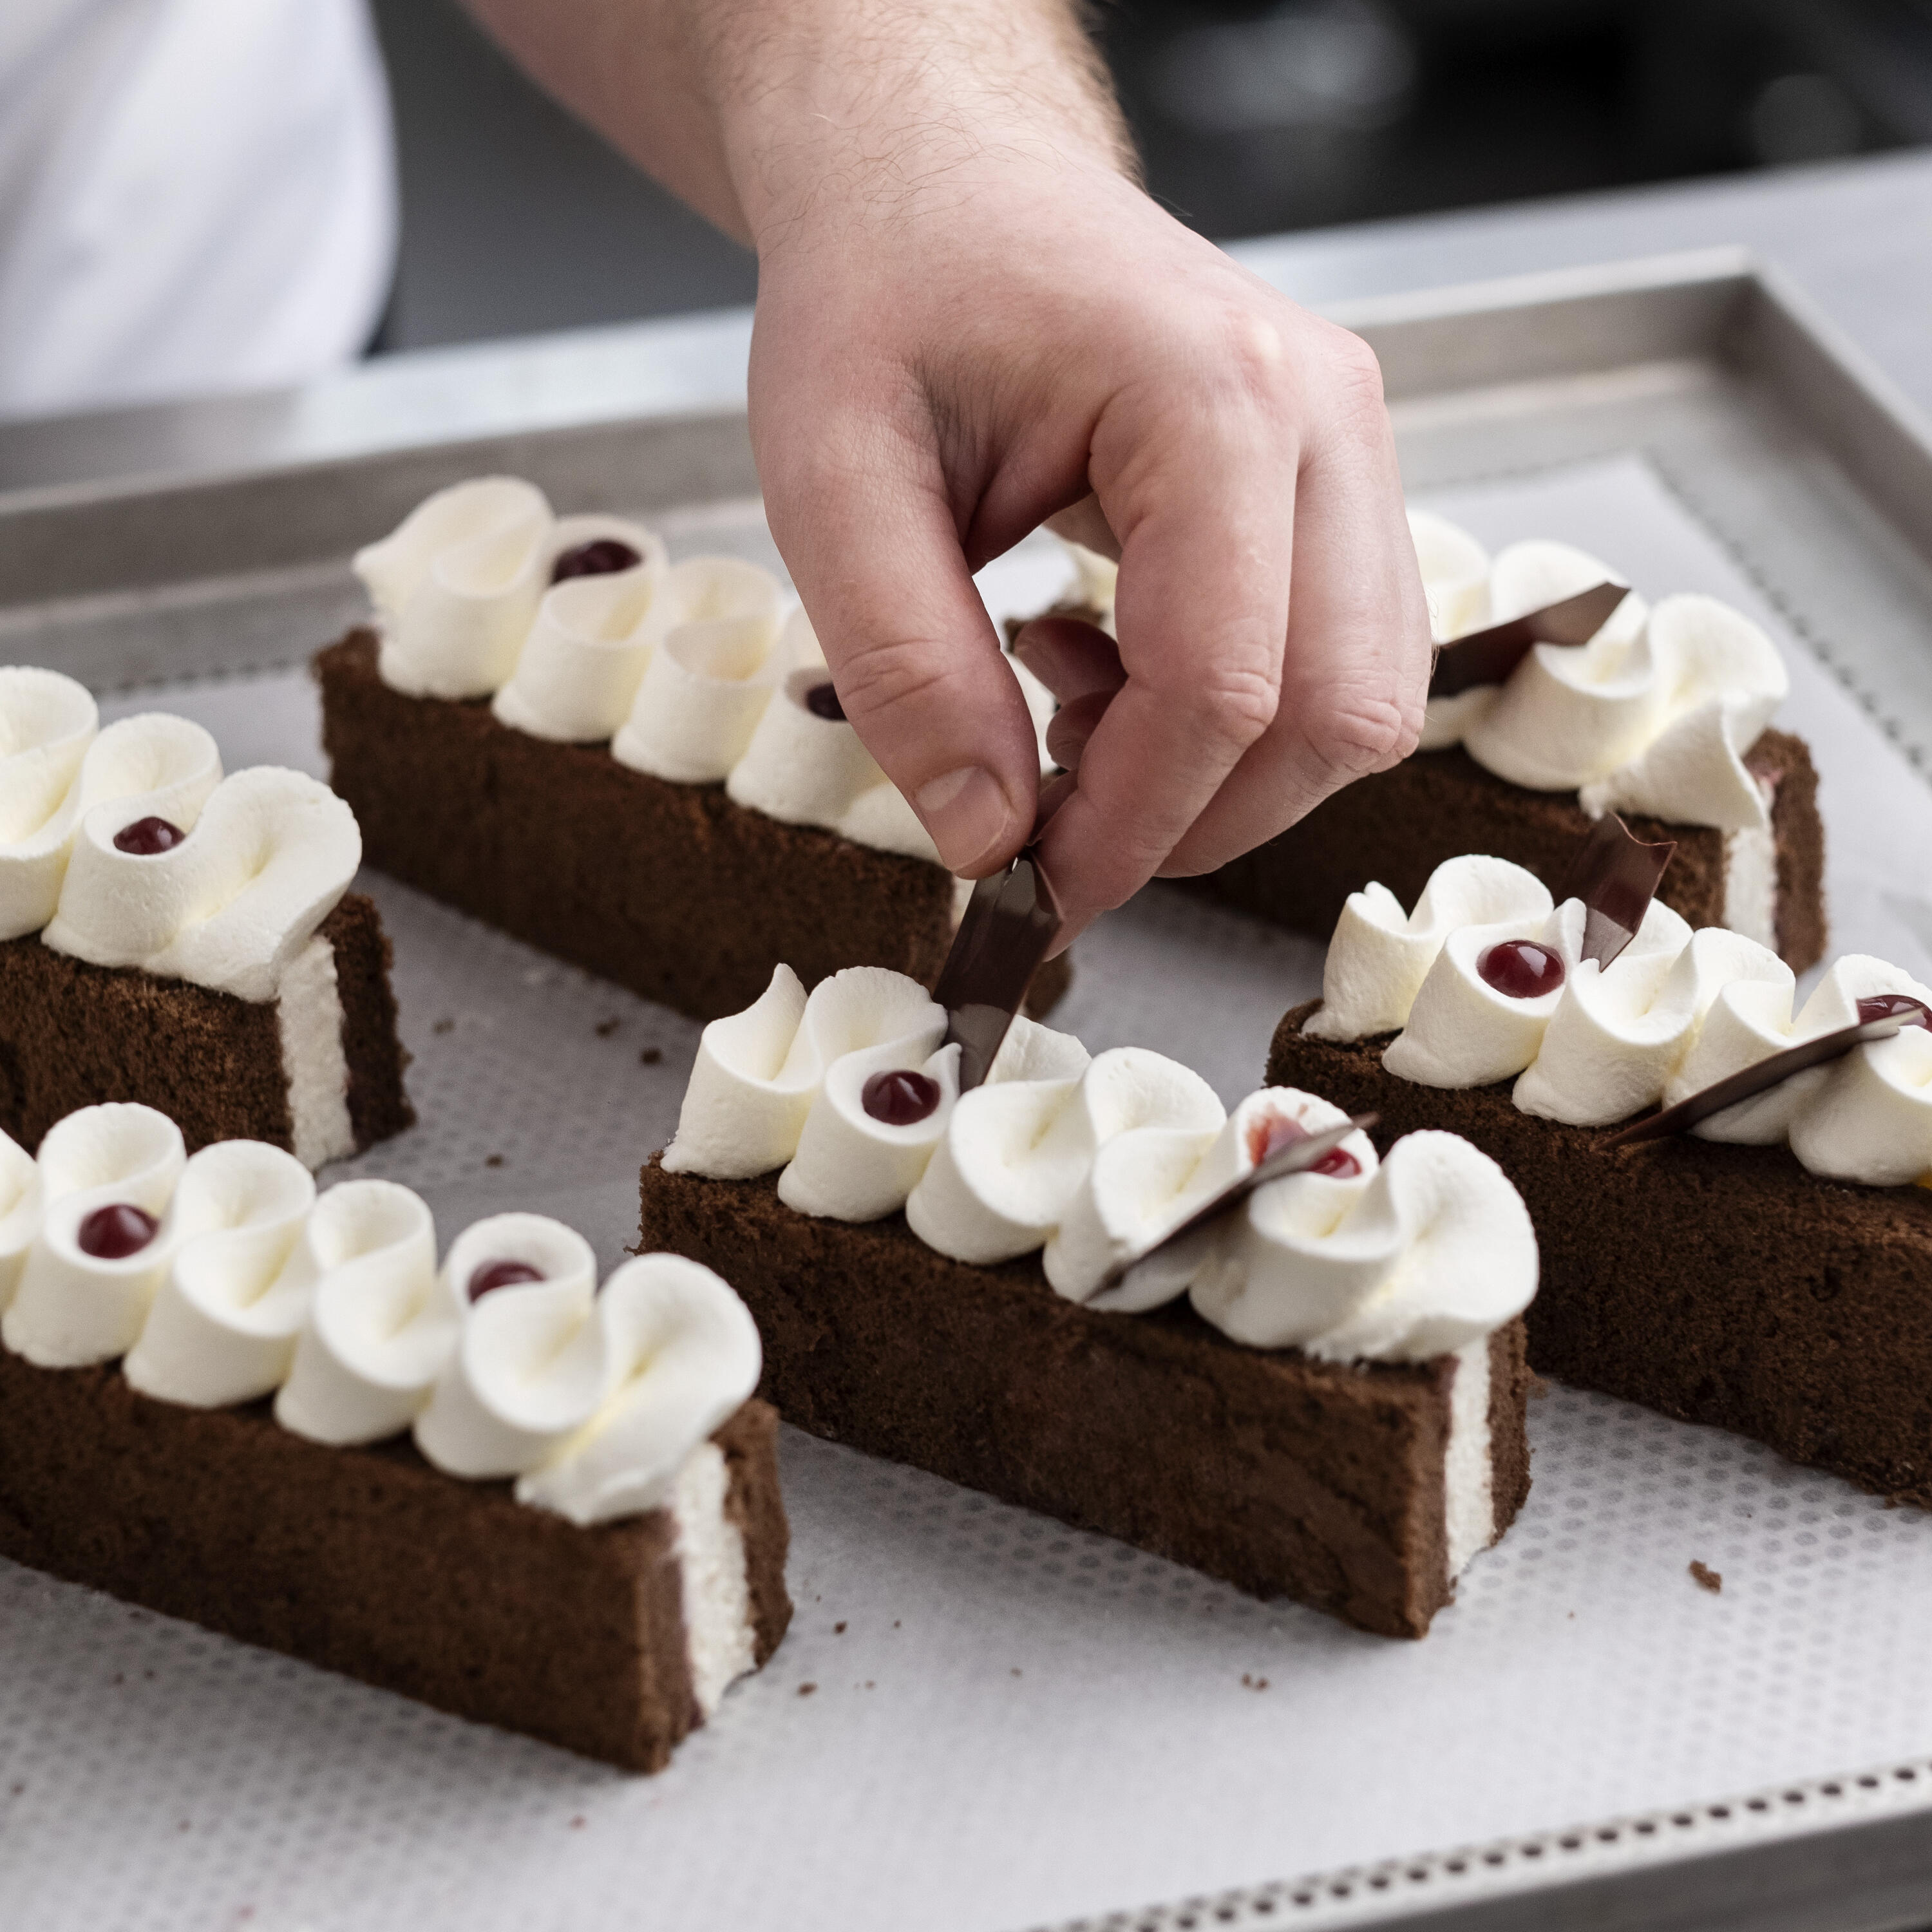 ‘Pastry chefs talk with their hands.’